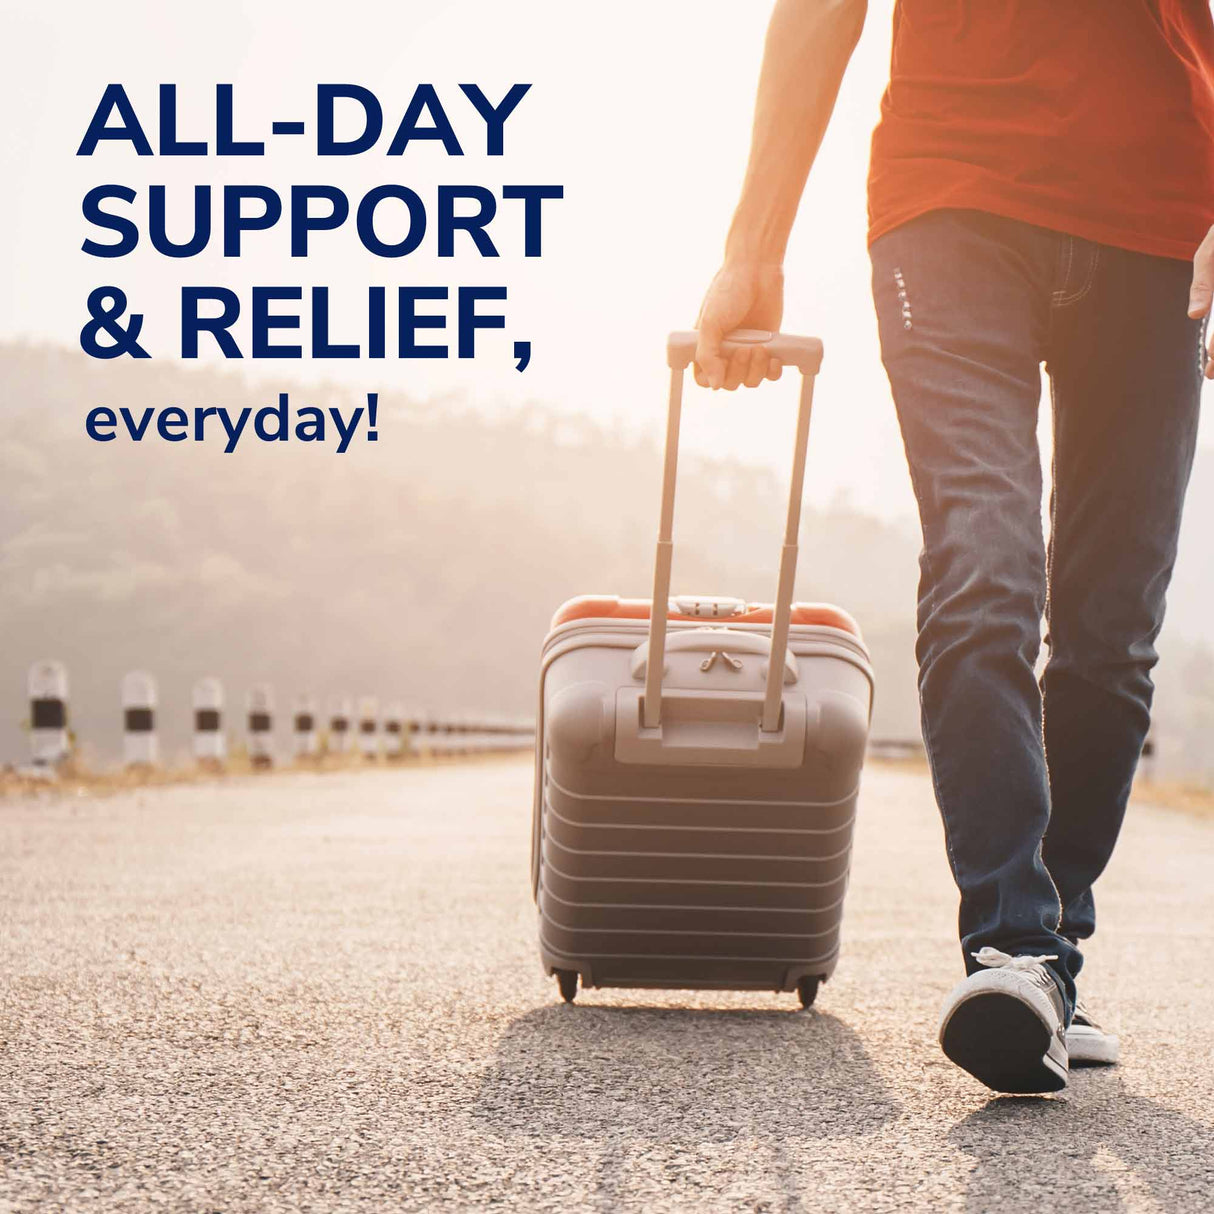 image of all day support & relief everyday